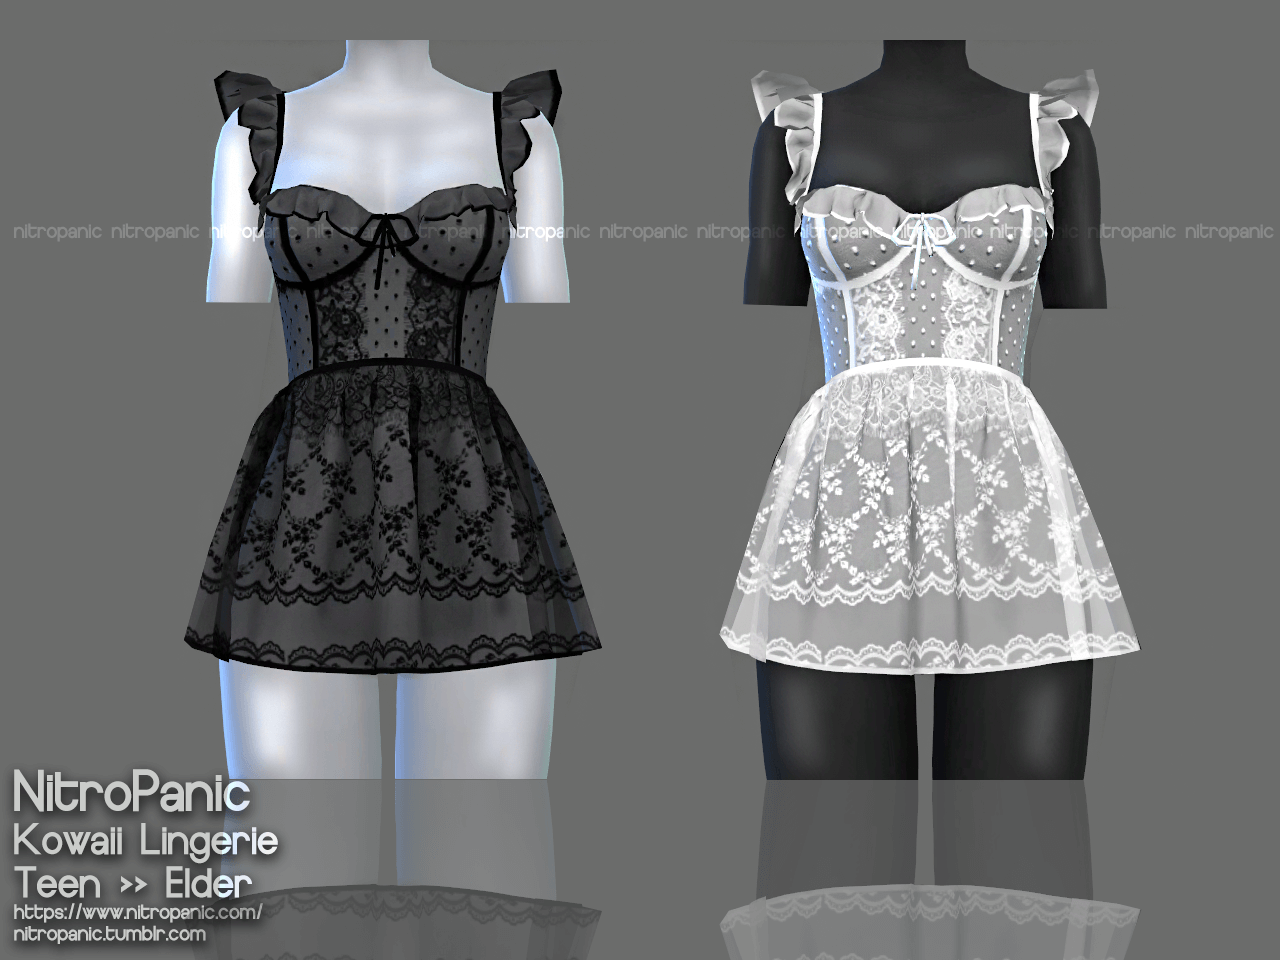 The sims 4 Kowaii lingerie | The Sims Book